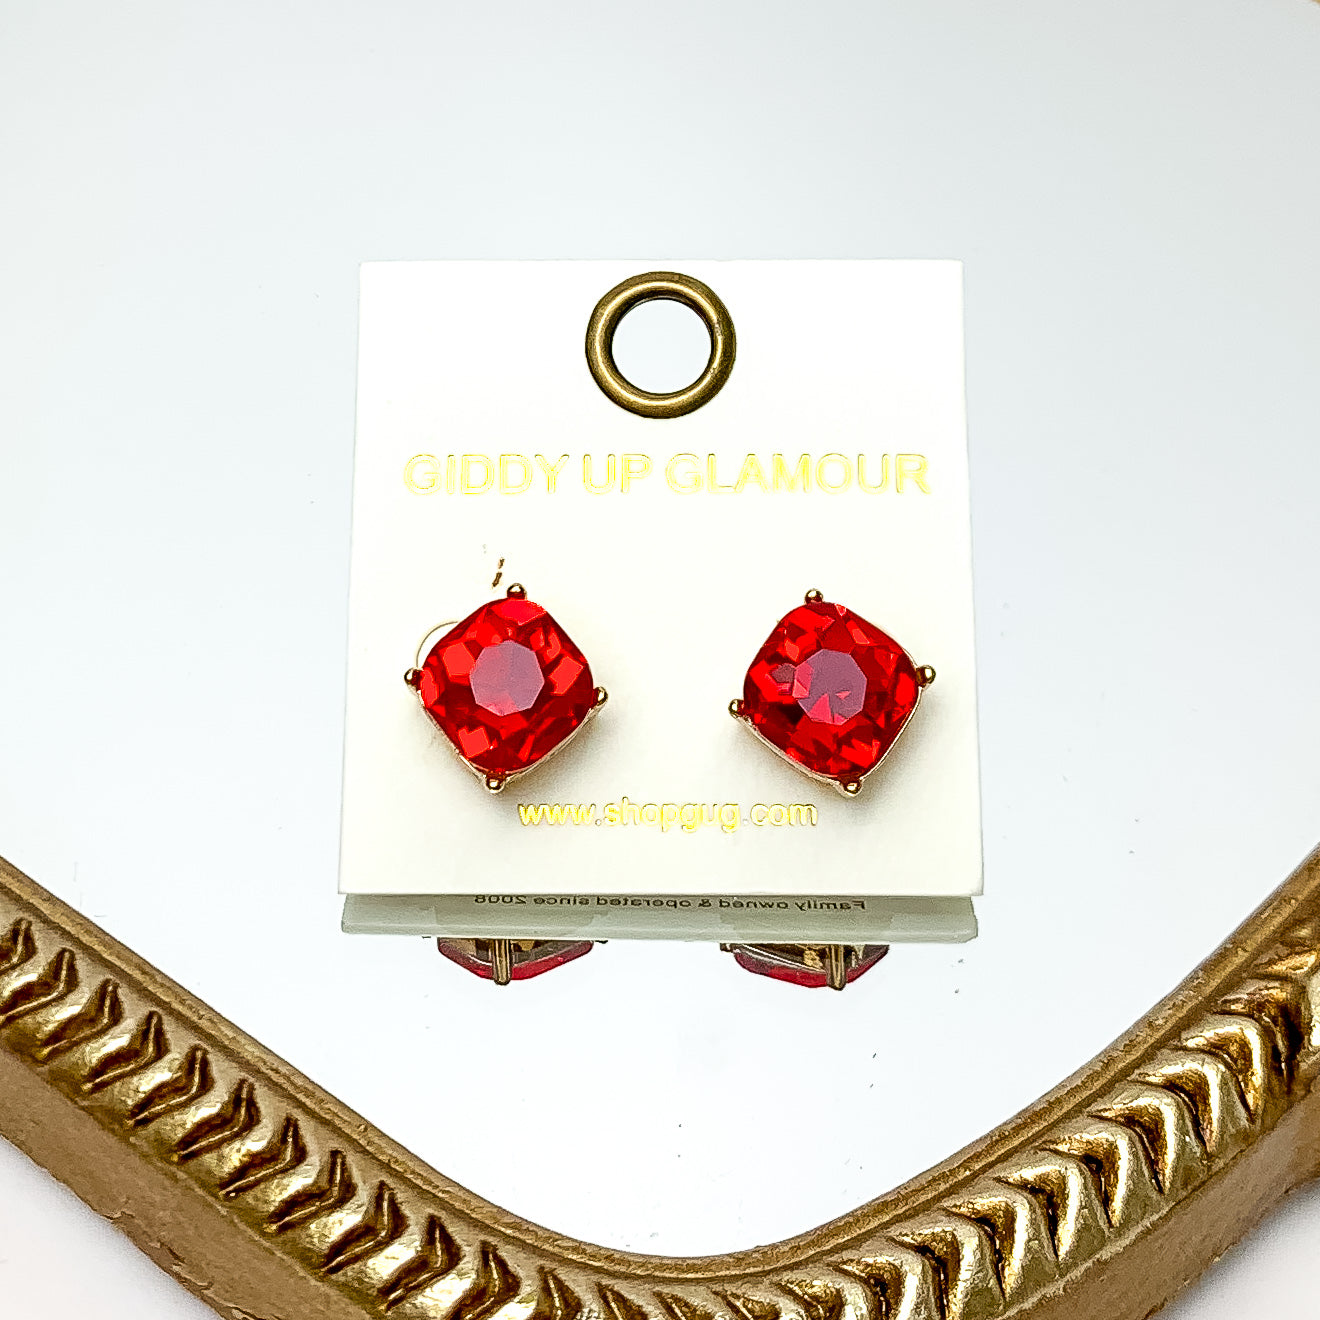 Large Crystal Stud Earrings in Red. These earrings are pictured laying on a gold trimmed mirror.